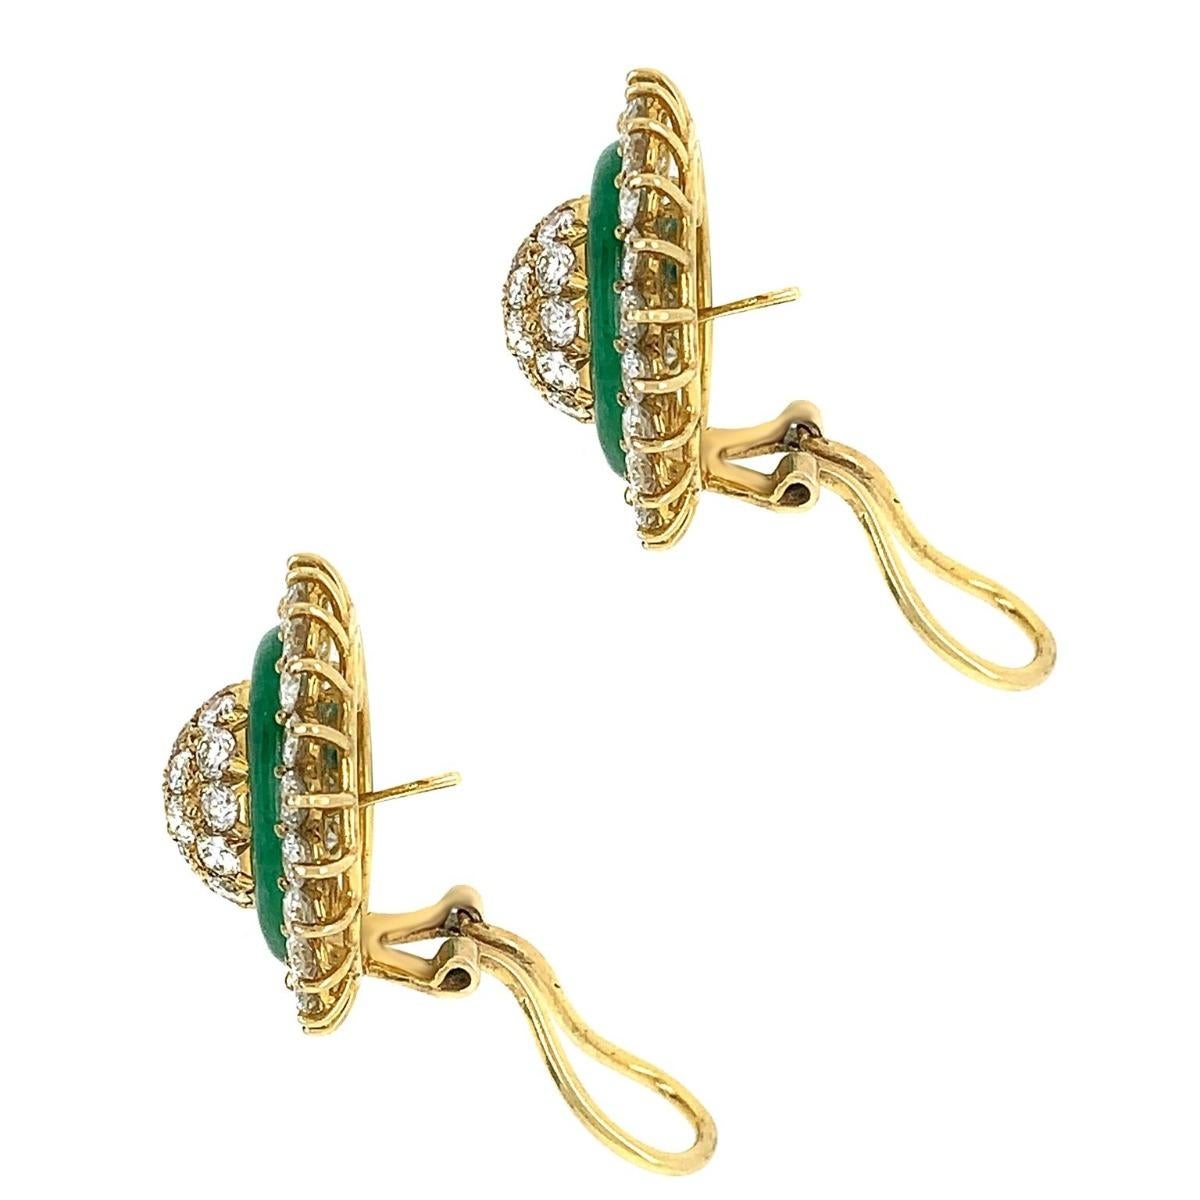 18K Yellow Gold Diamond Jade Clip- On Earrings

Metal: 18K Yellow Gold
Condition: Excellent
Stamped: 750 18K
Width: 0.8 inch
Item Weight: 16.2 grams
Gemstone: Diamond, Jade
Type: Clip- On 
Has a Certificate.

SKU#E-01385